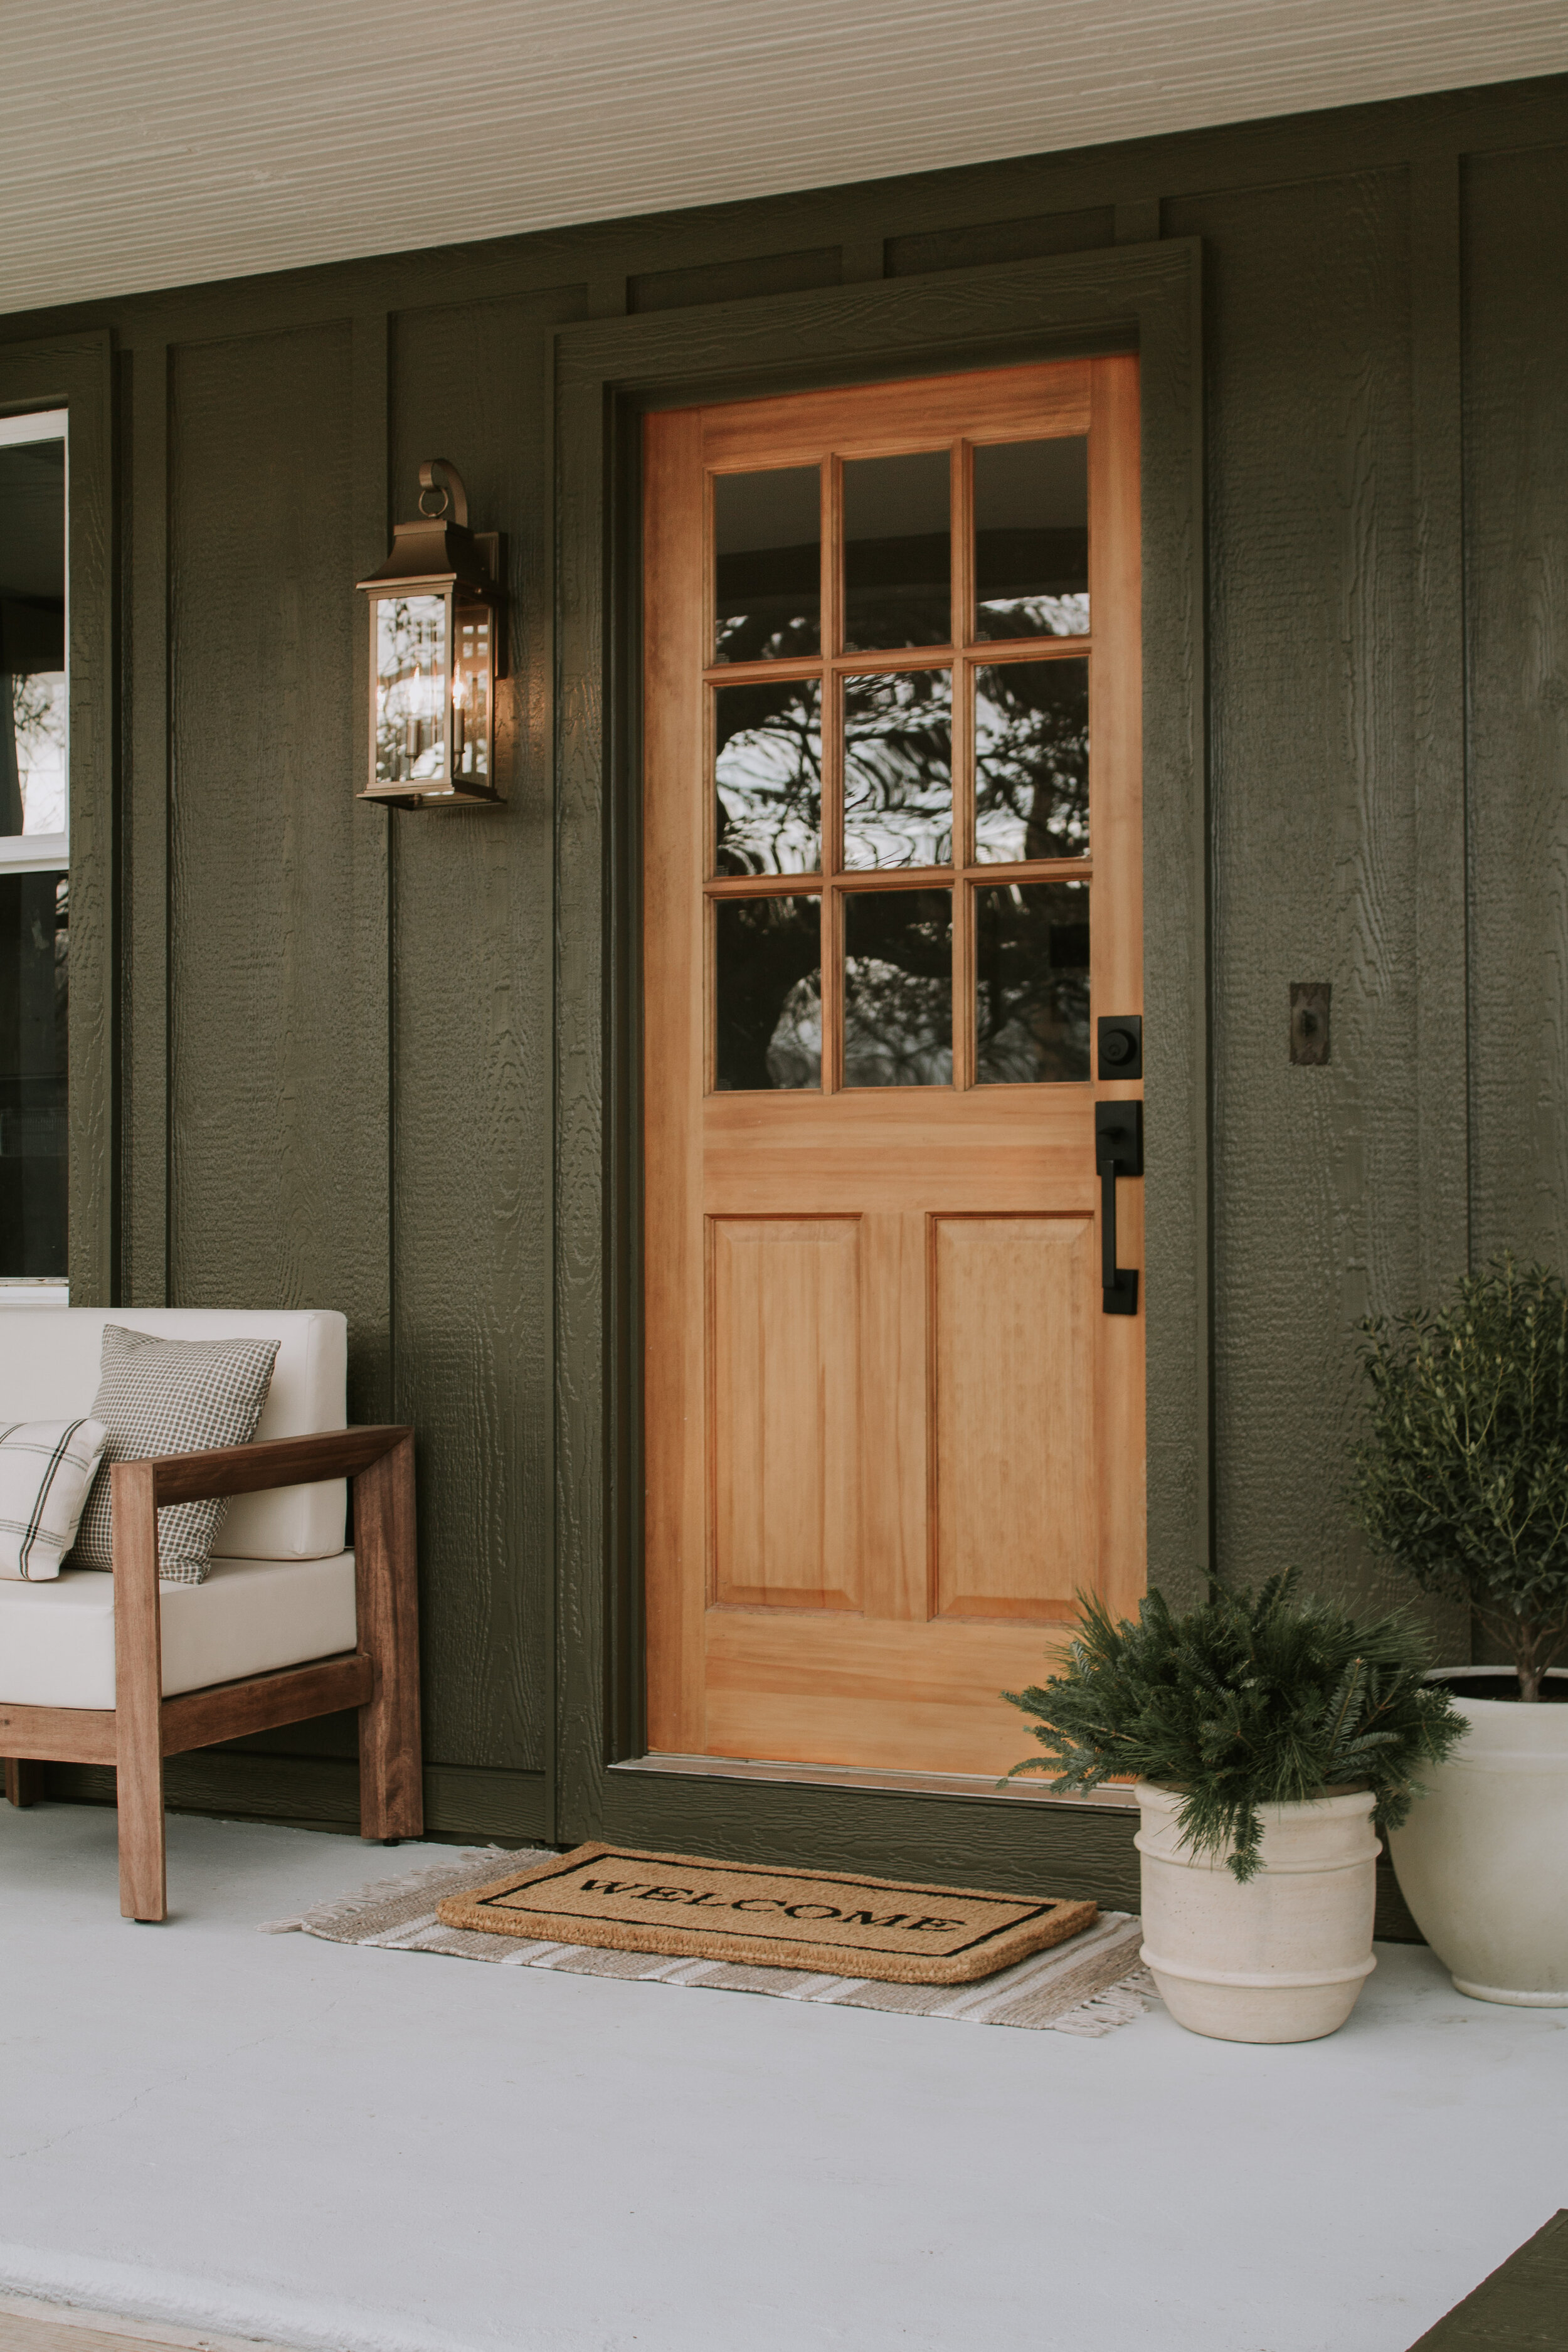 A closeup of our front entry porch & 15 layered entry rug combos - Nadine Stay | Outdoor club chairs with a wood frame and ivory cushions, wood front door with window panes, doormat, aged outdoor pots, and an antique outdoor lantern sconce. Cabin po…